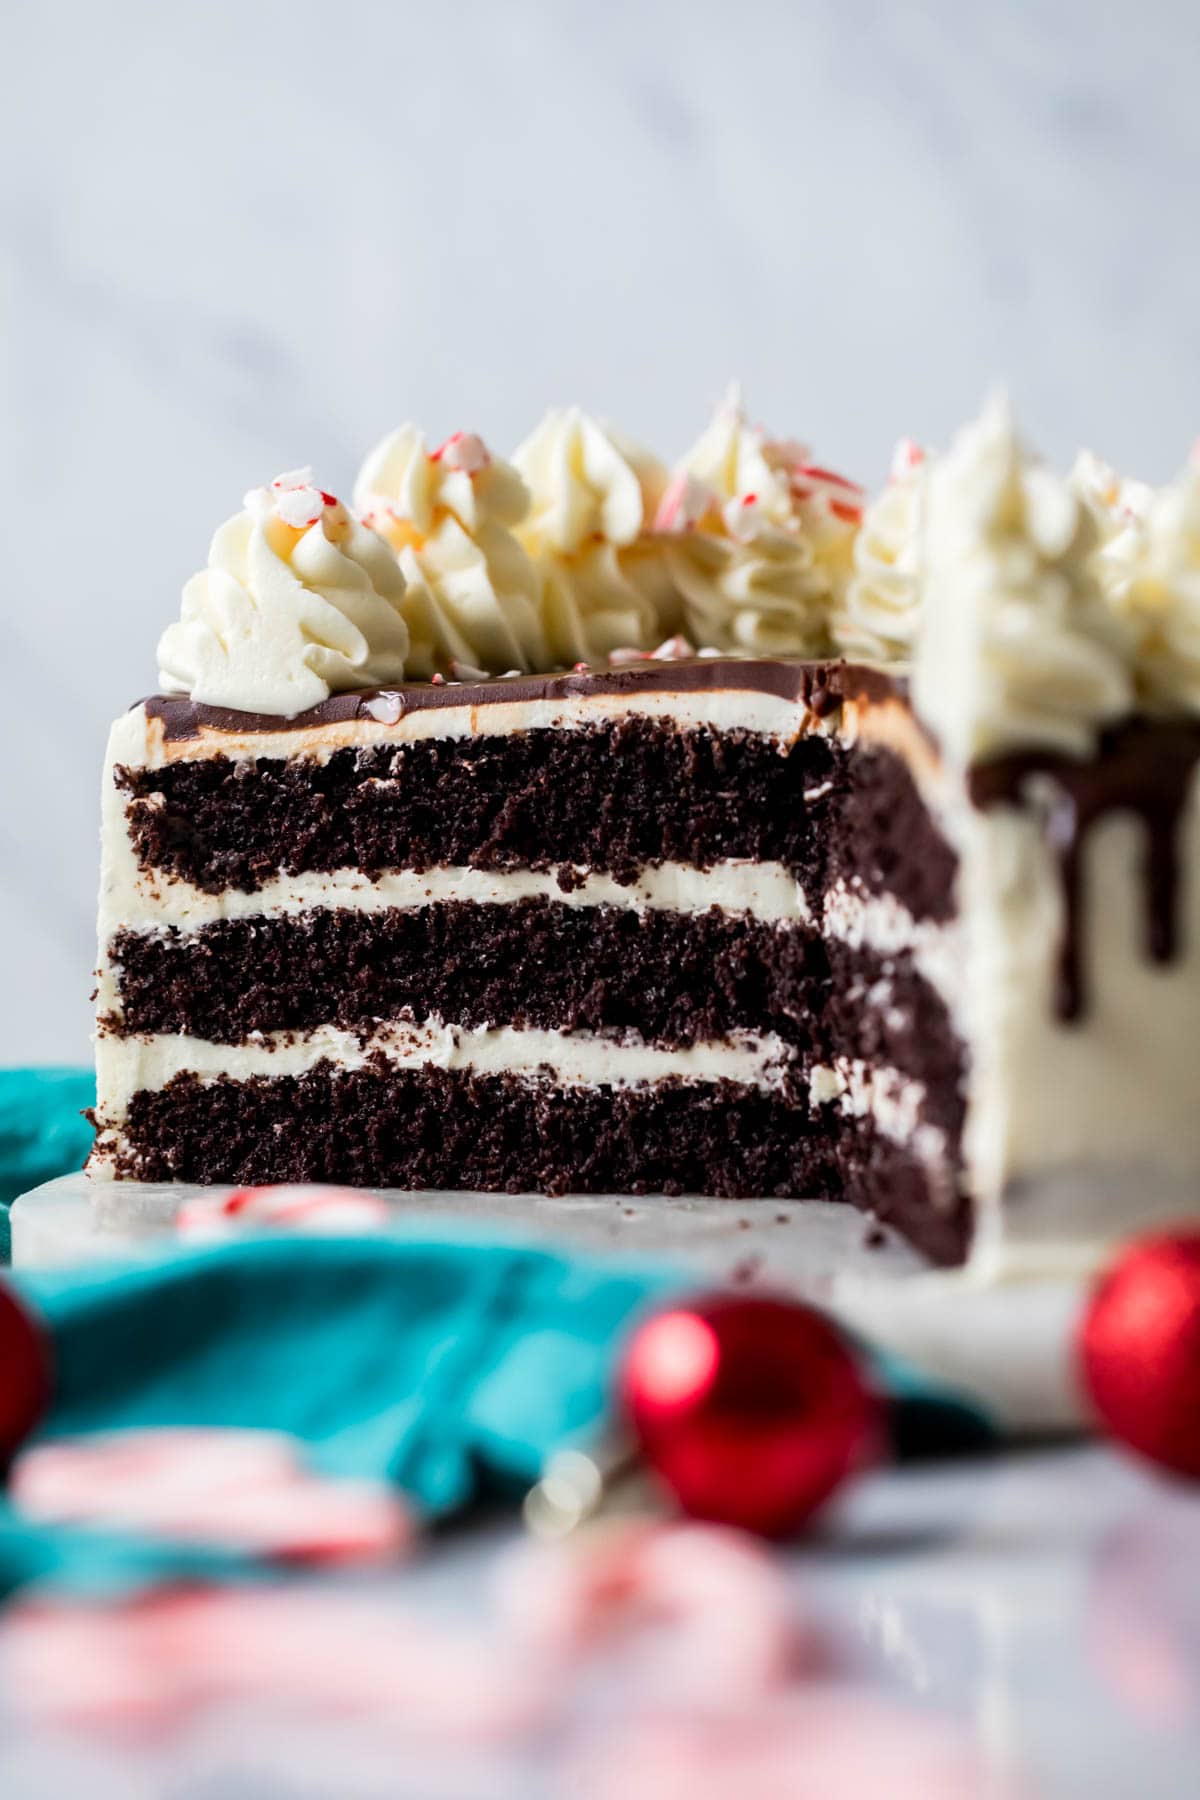 Cross section of a peppermint bark cake made with three layers of chocolate cake and a white chocolate peppermint buttercream.